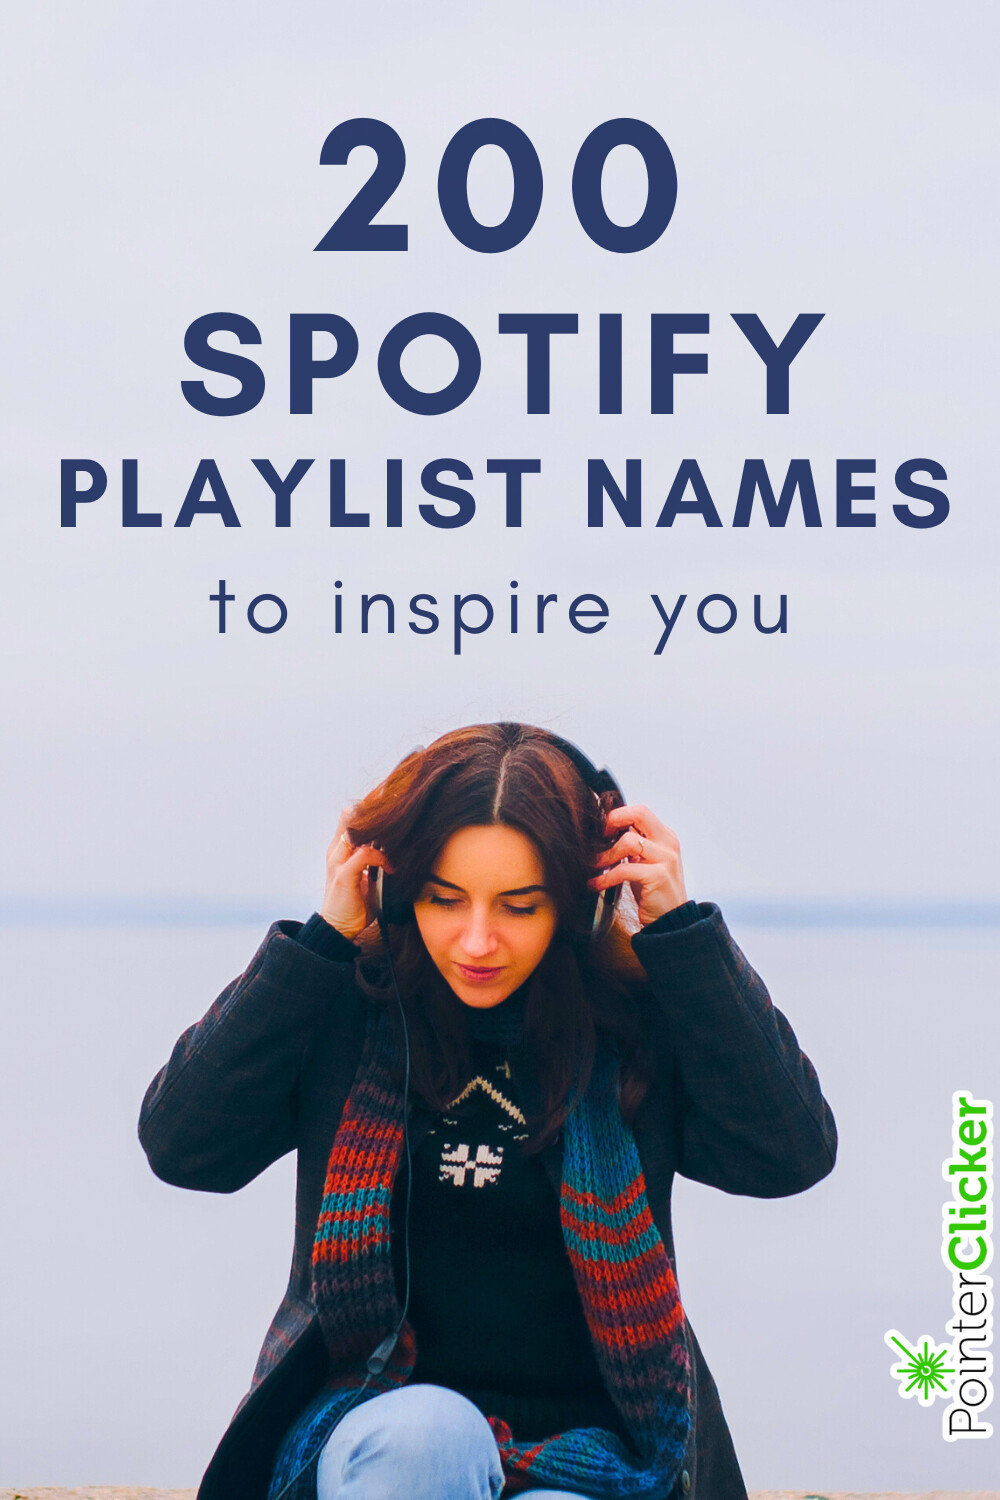 200 spotify playlist names to inspire you